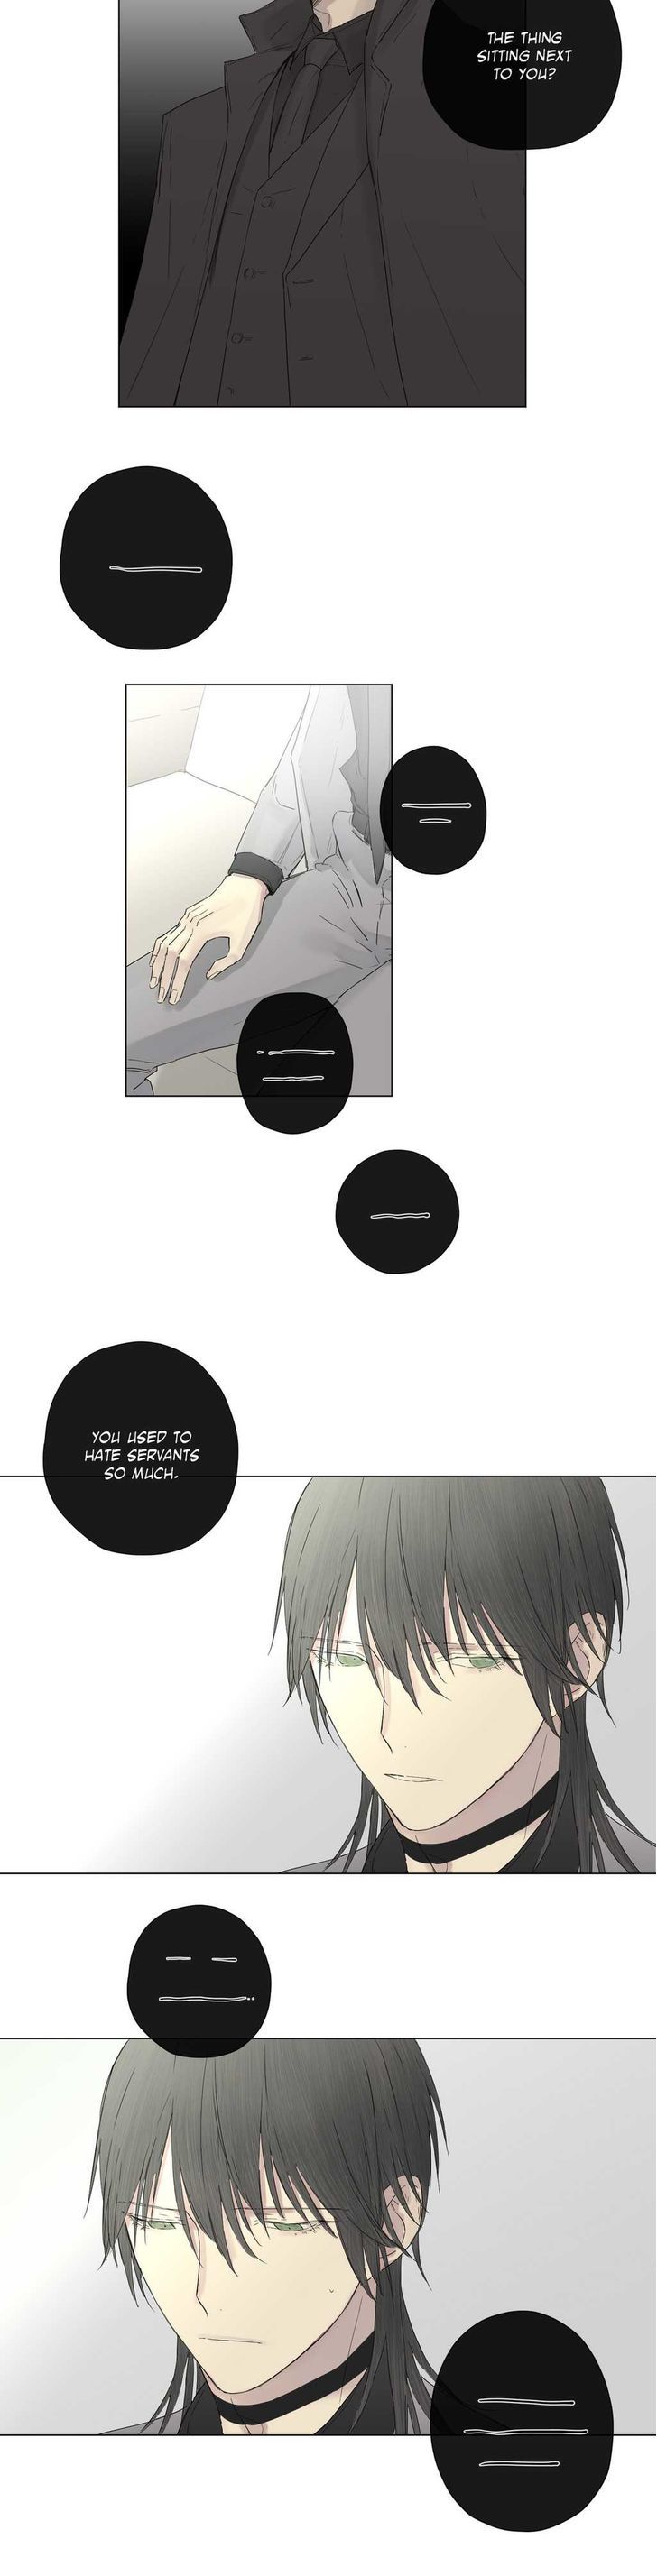 Royal Servant - Chapter 10 Page 3